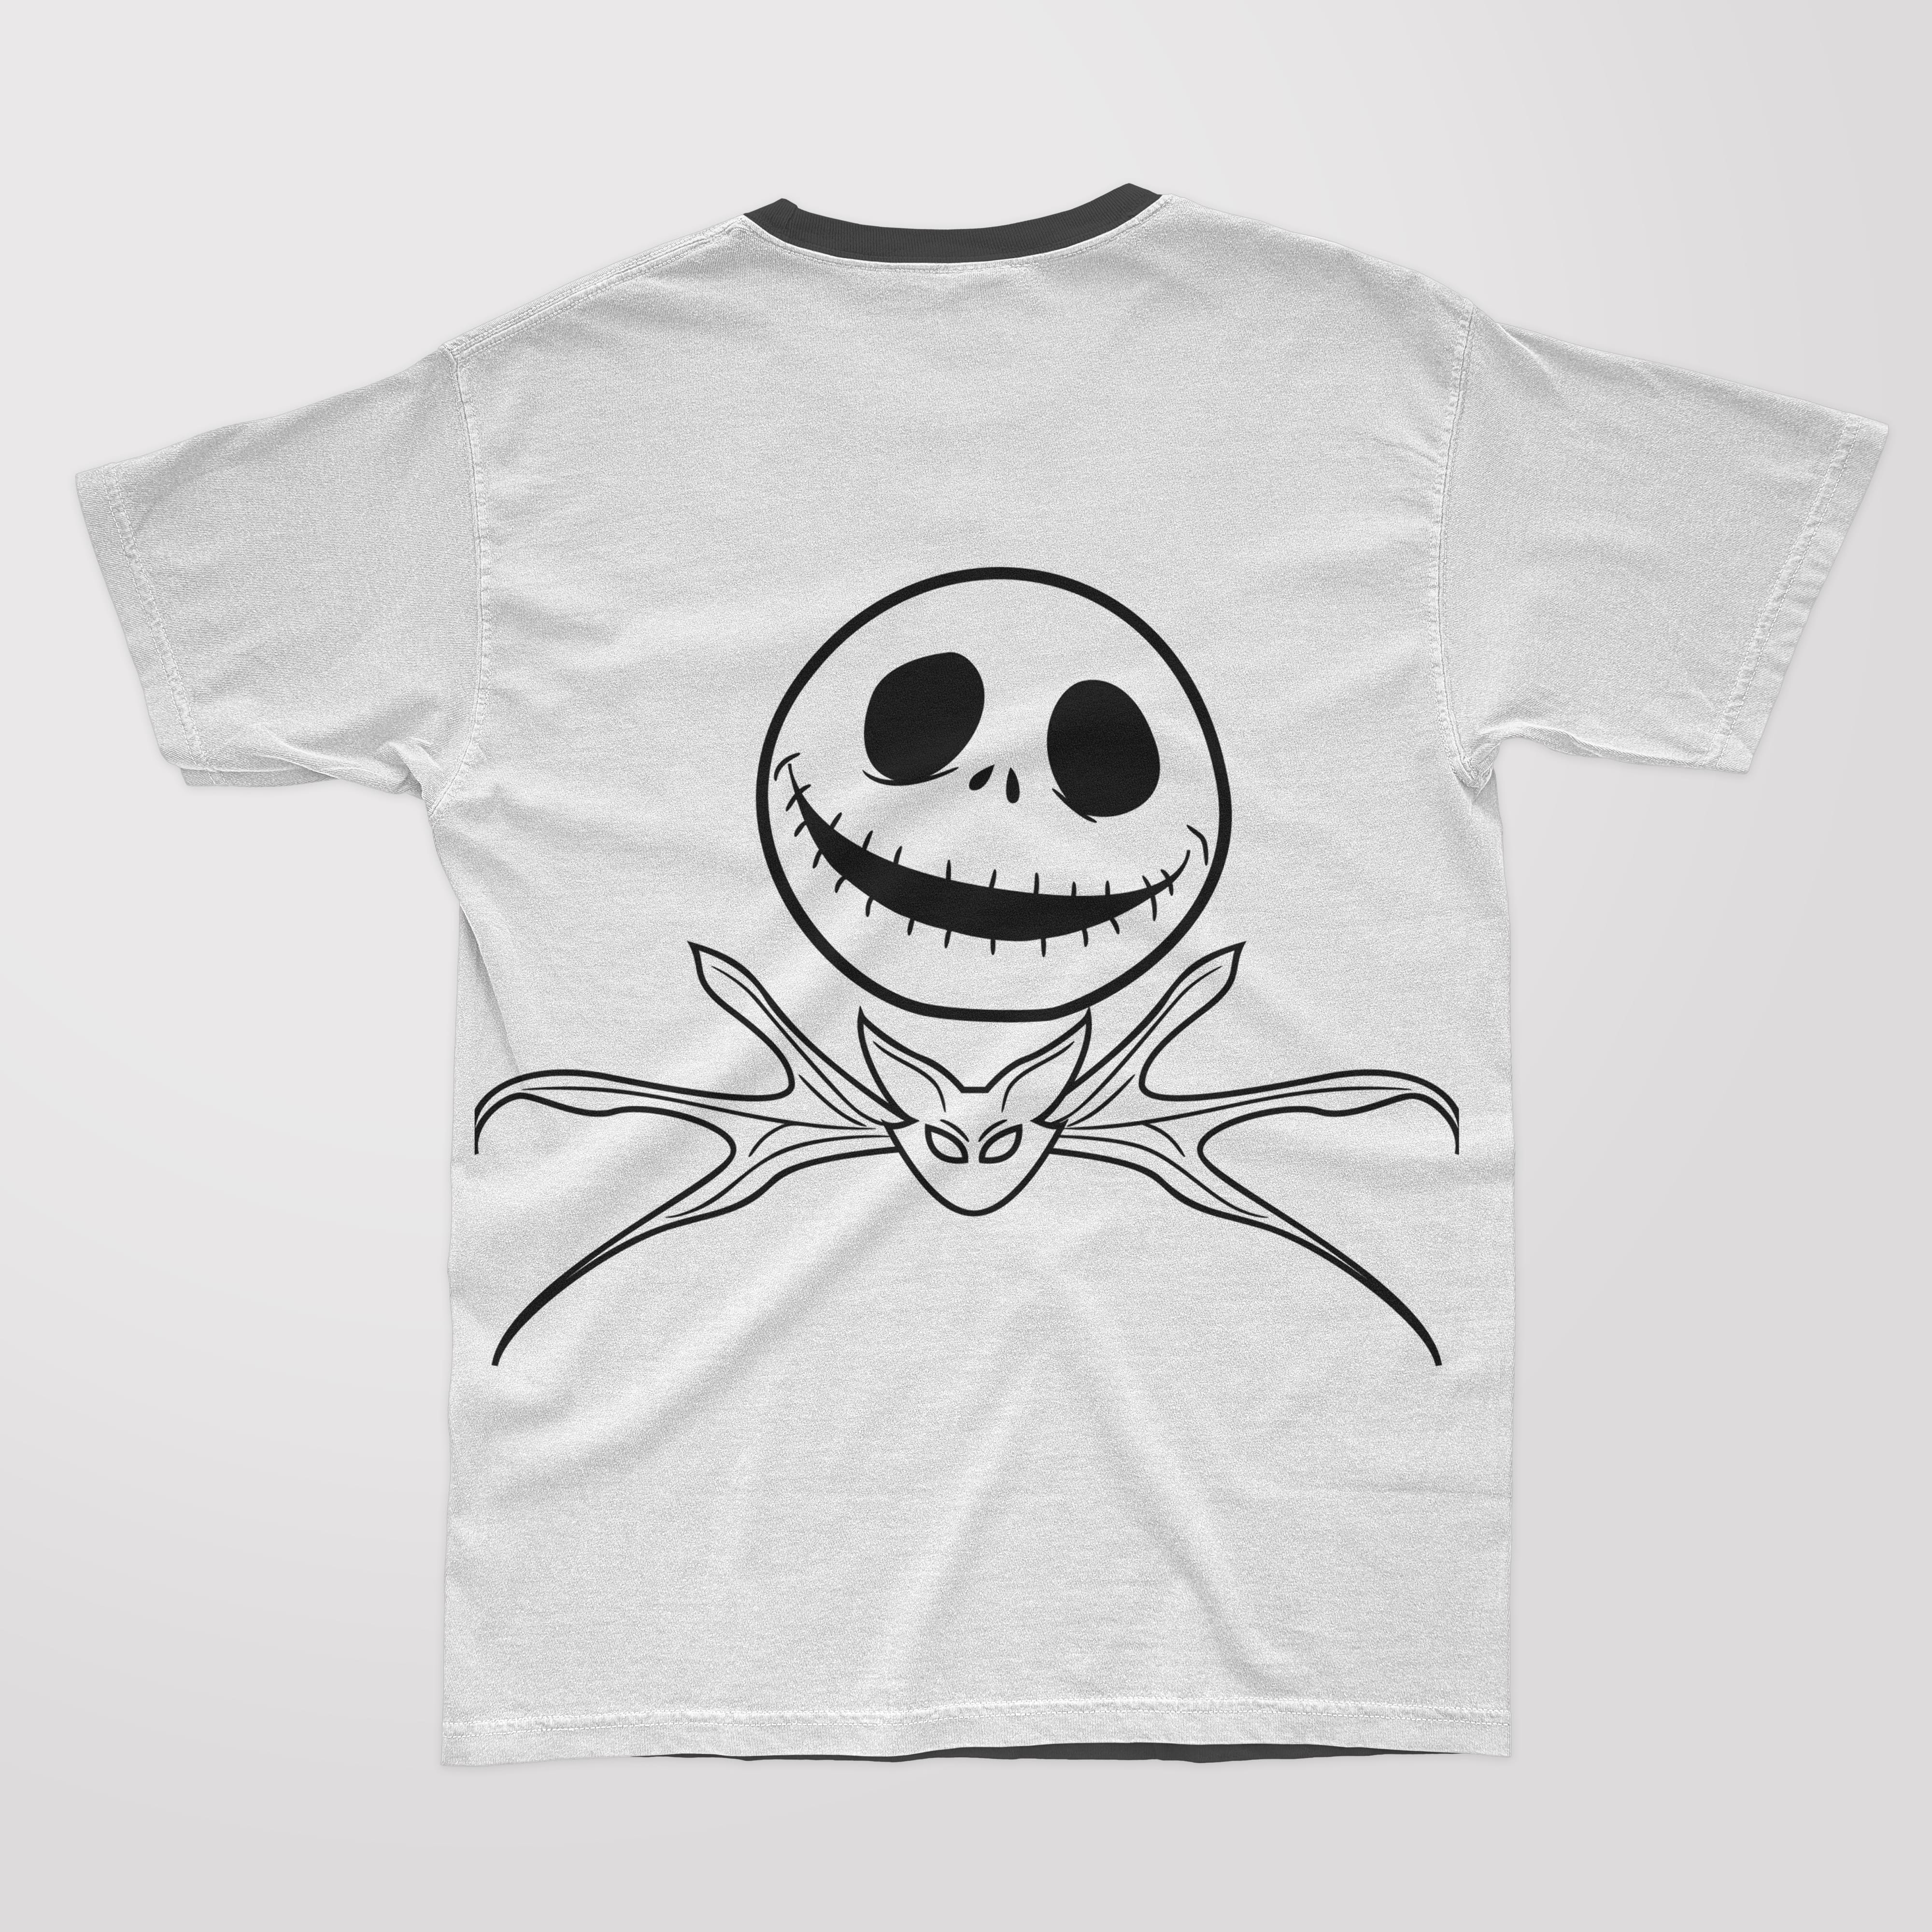 Illustrations of a bat and skellington on the white t-shirt.